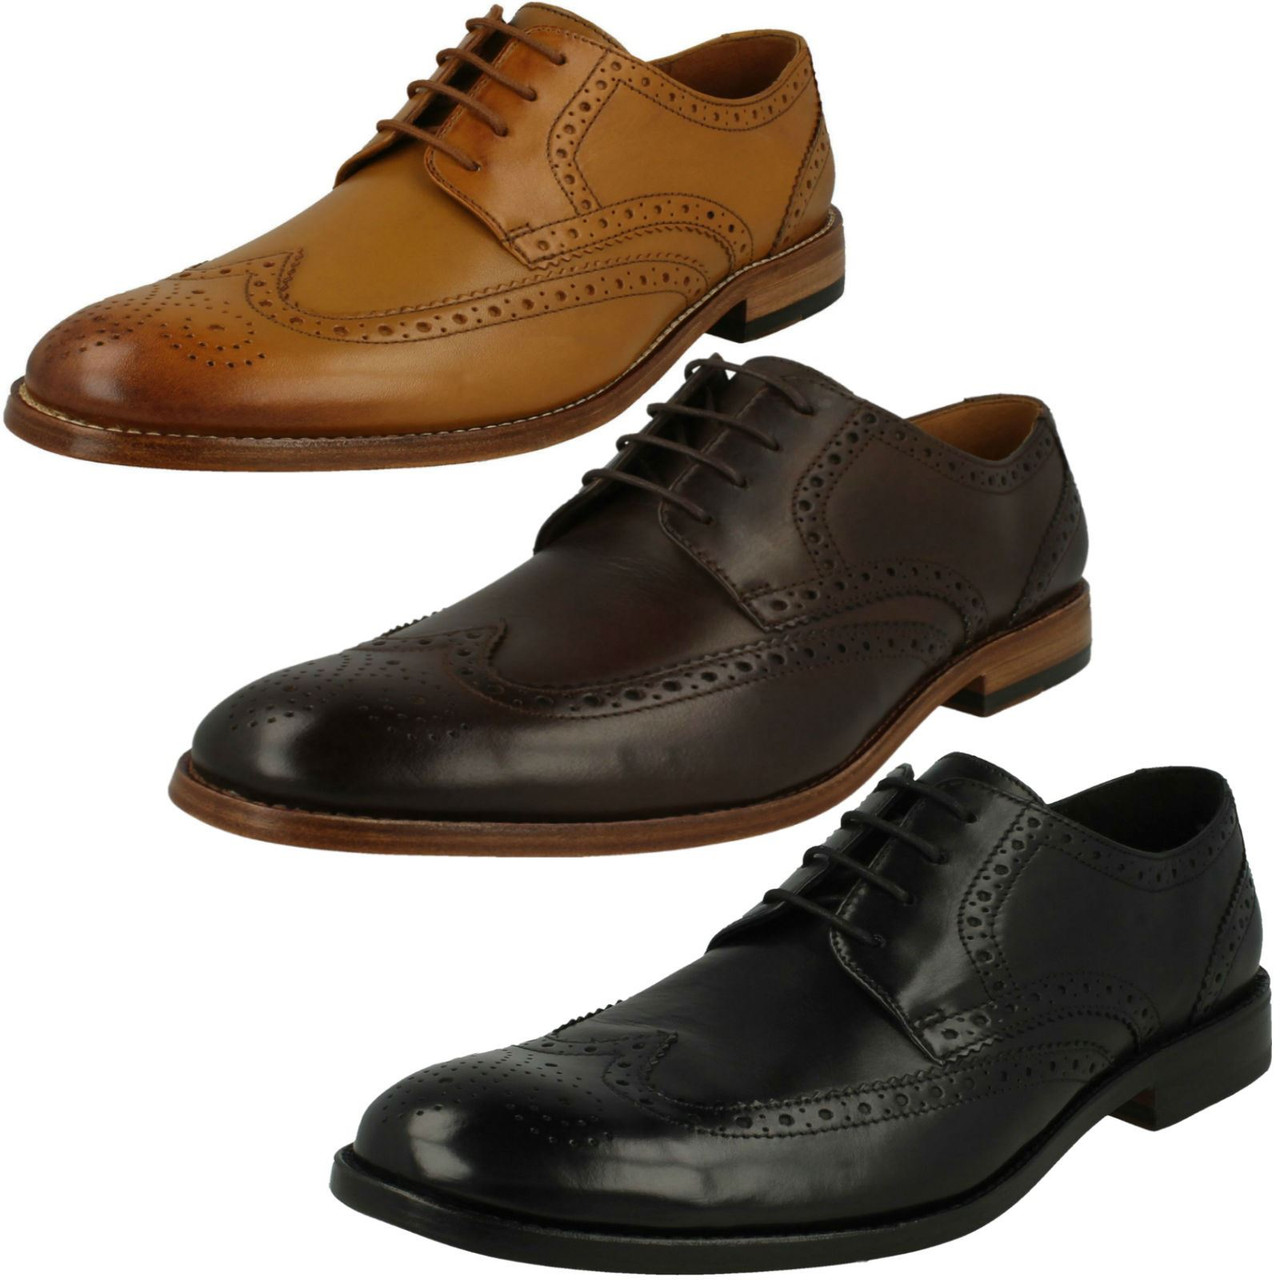 clarks shoes brown brogues